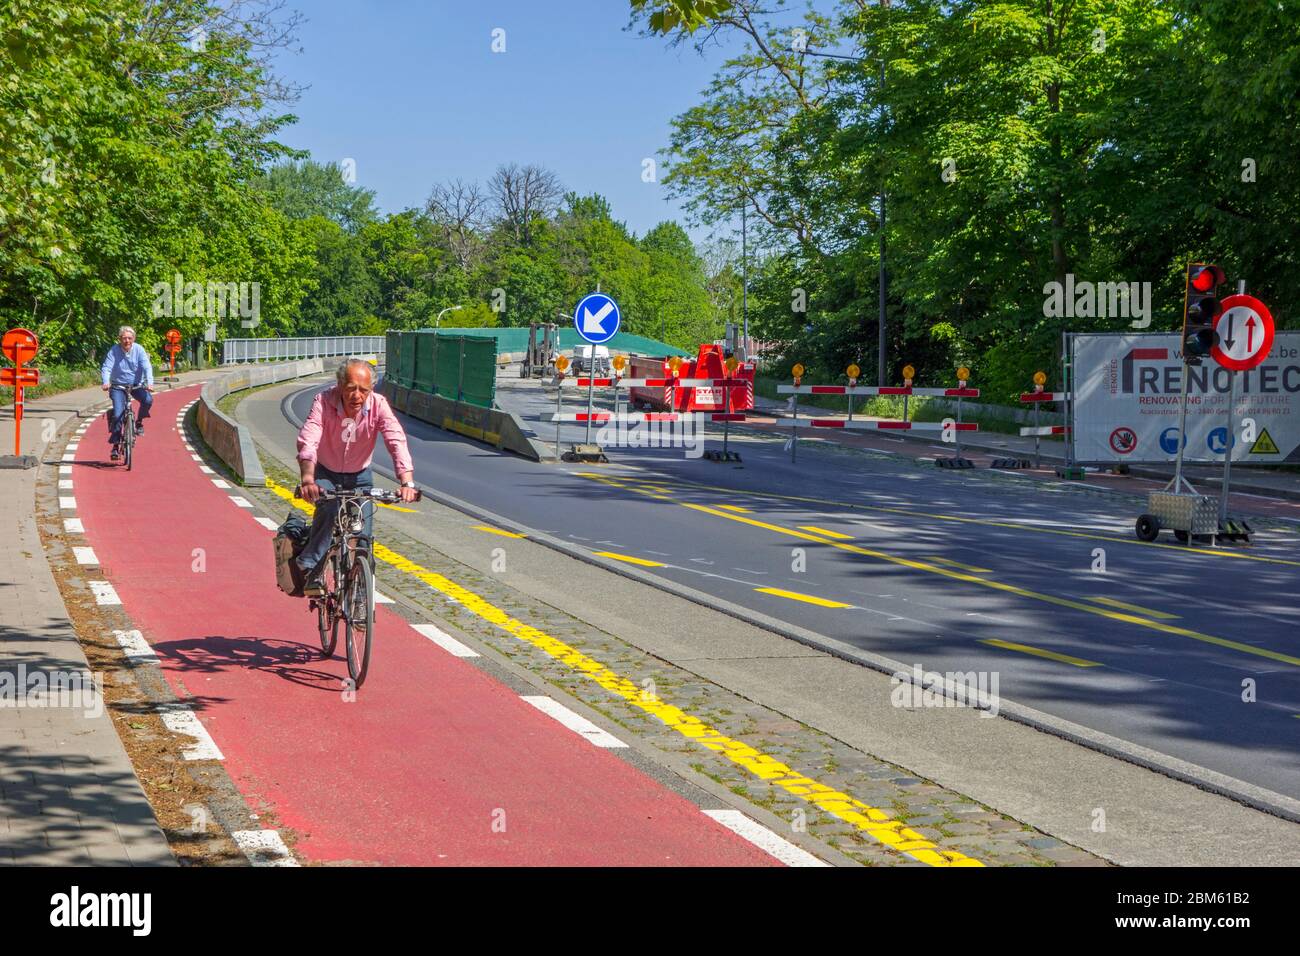 Cyclists riding on bicycle path past road works done at Mariakerkebrug, 60s bridge in the village Mariakerke near Ghent, East Flanders, Belgium Stock Photo